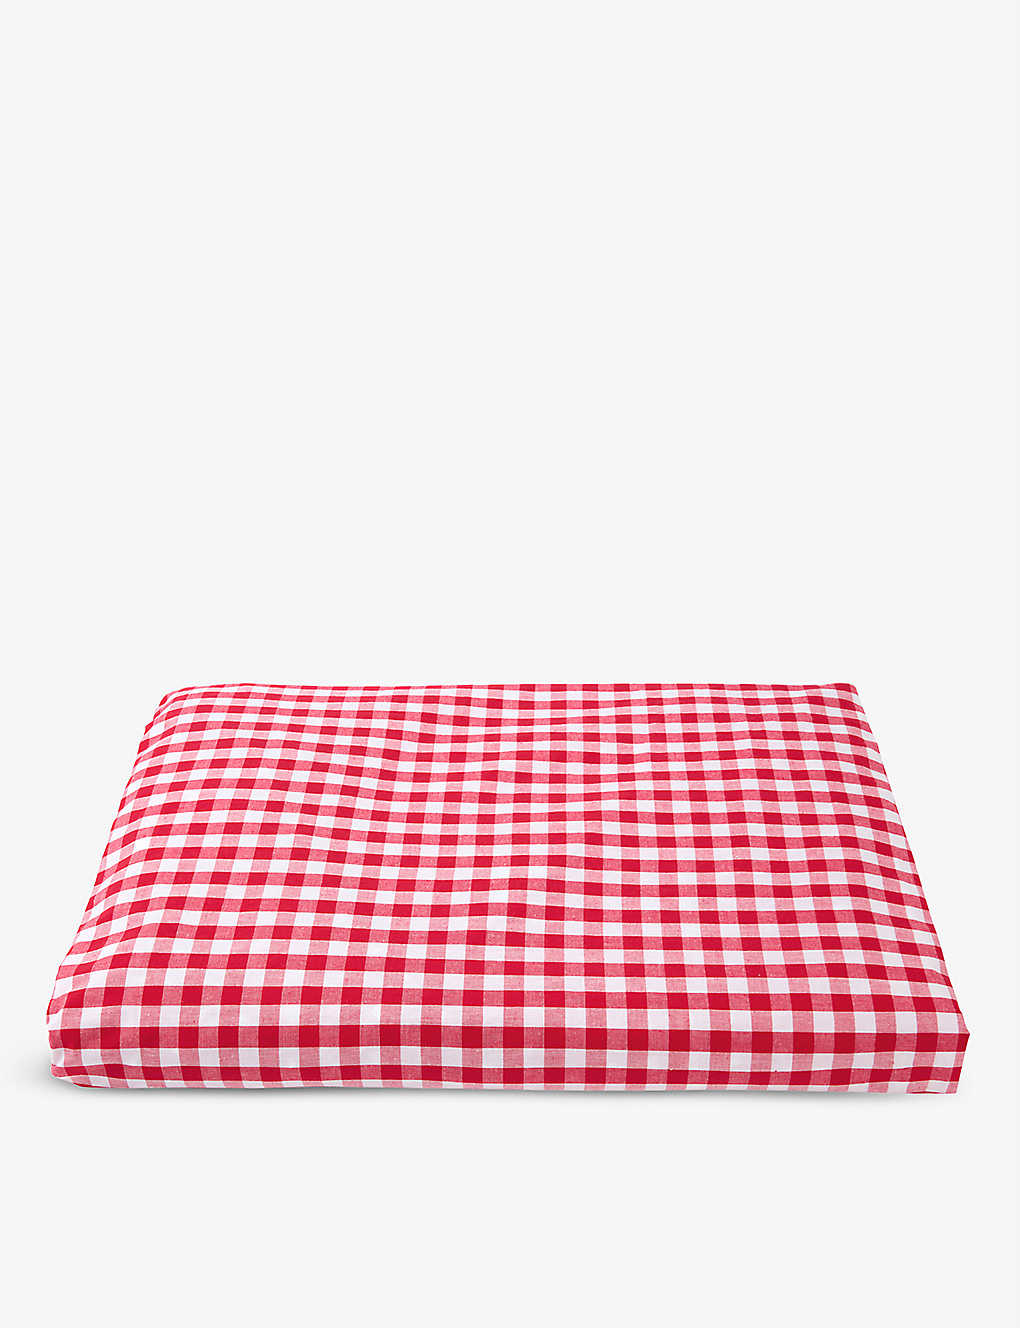 The Little White Company Red Gingham Cotton Fitted Cot Sheet 70x140cm Cot Bed